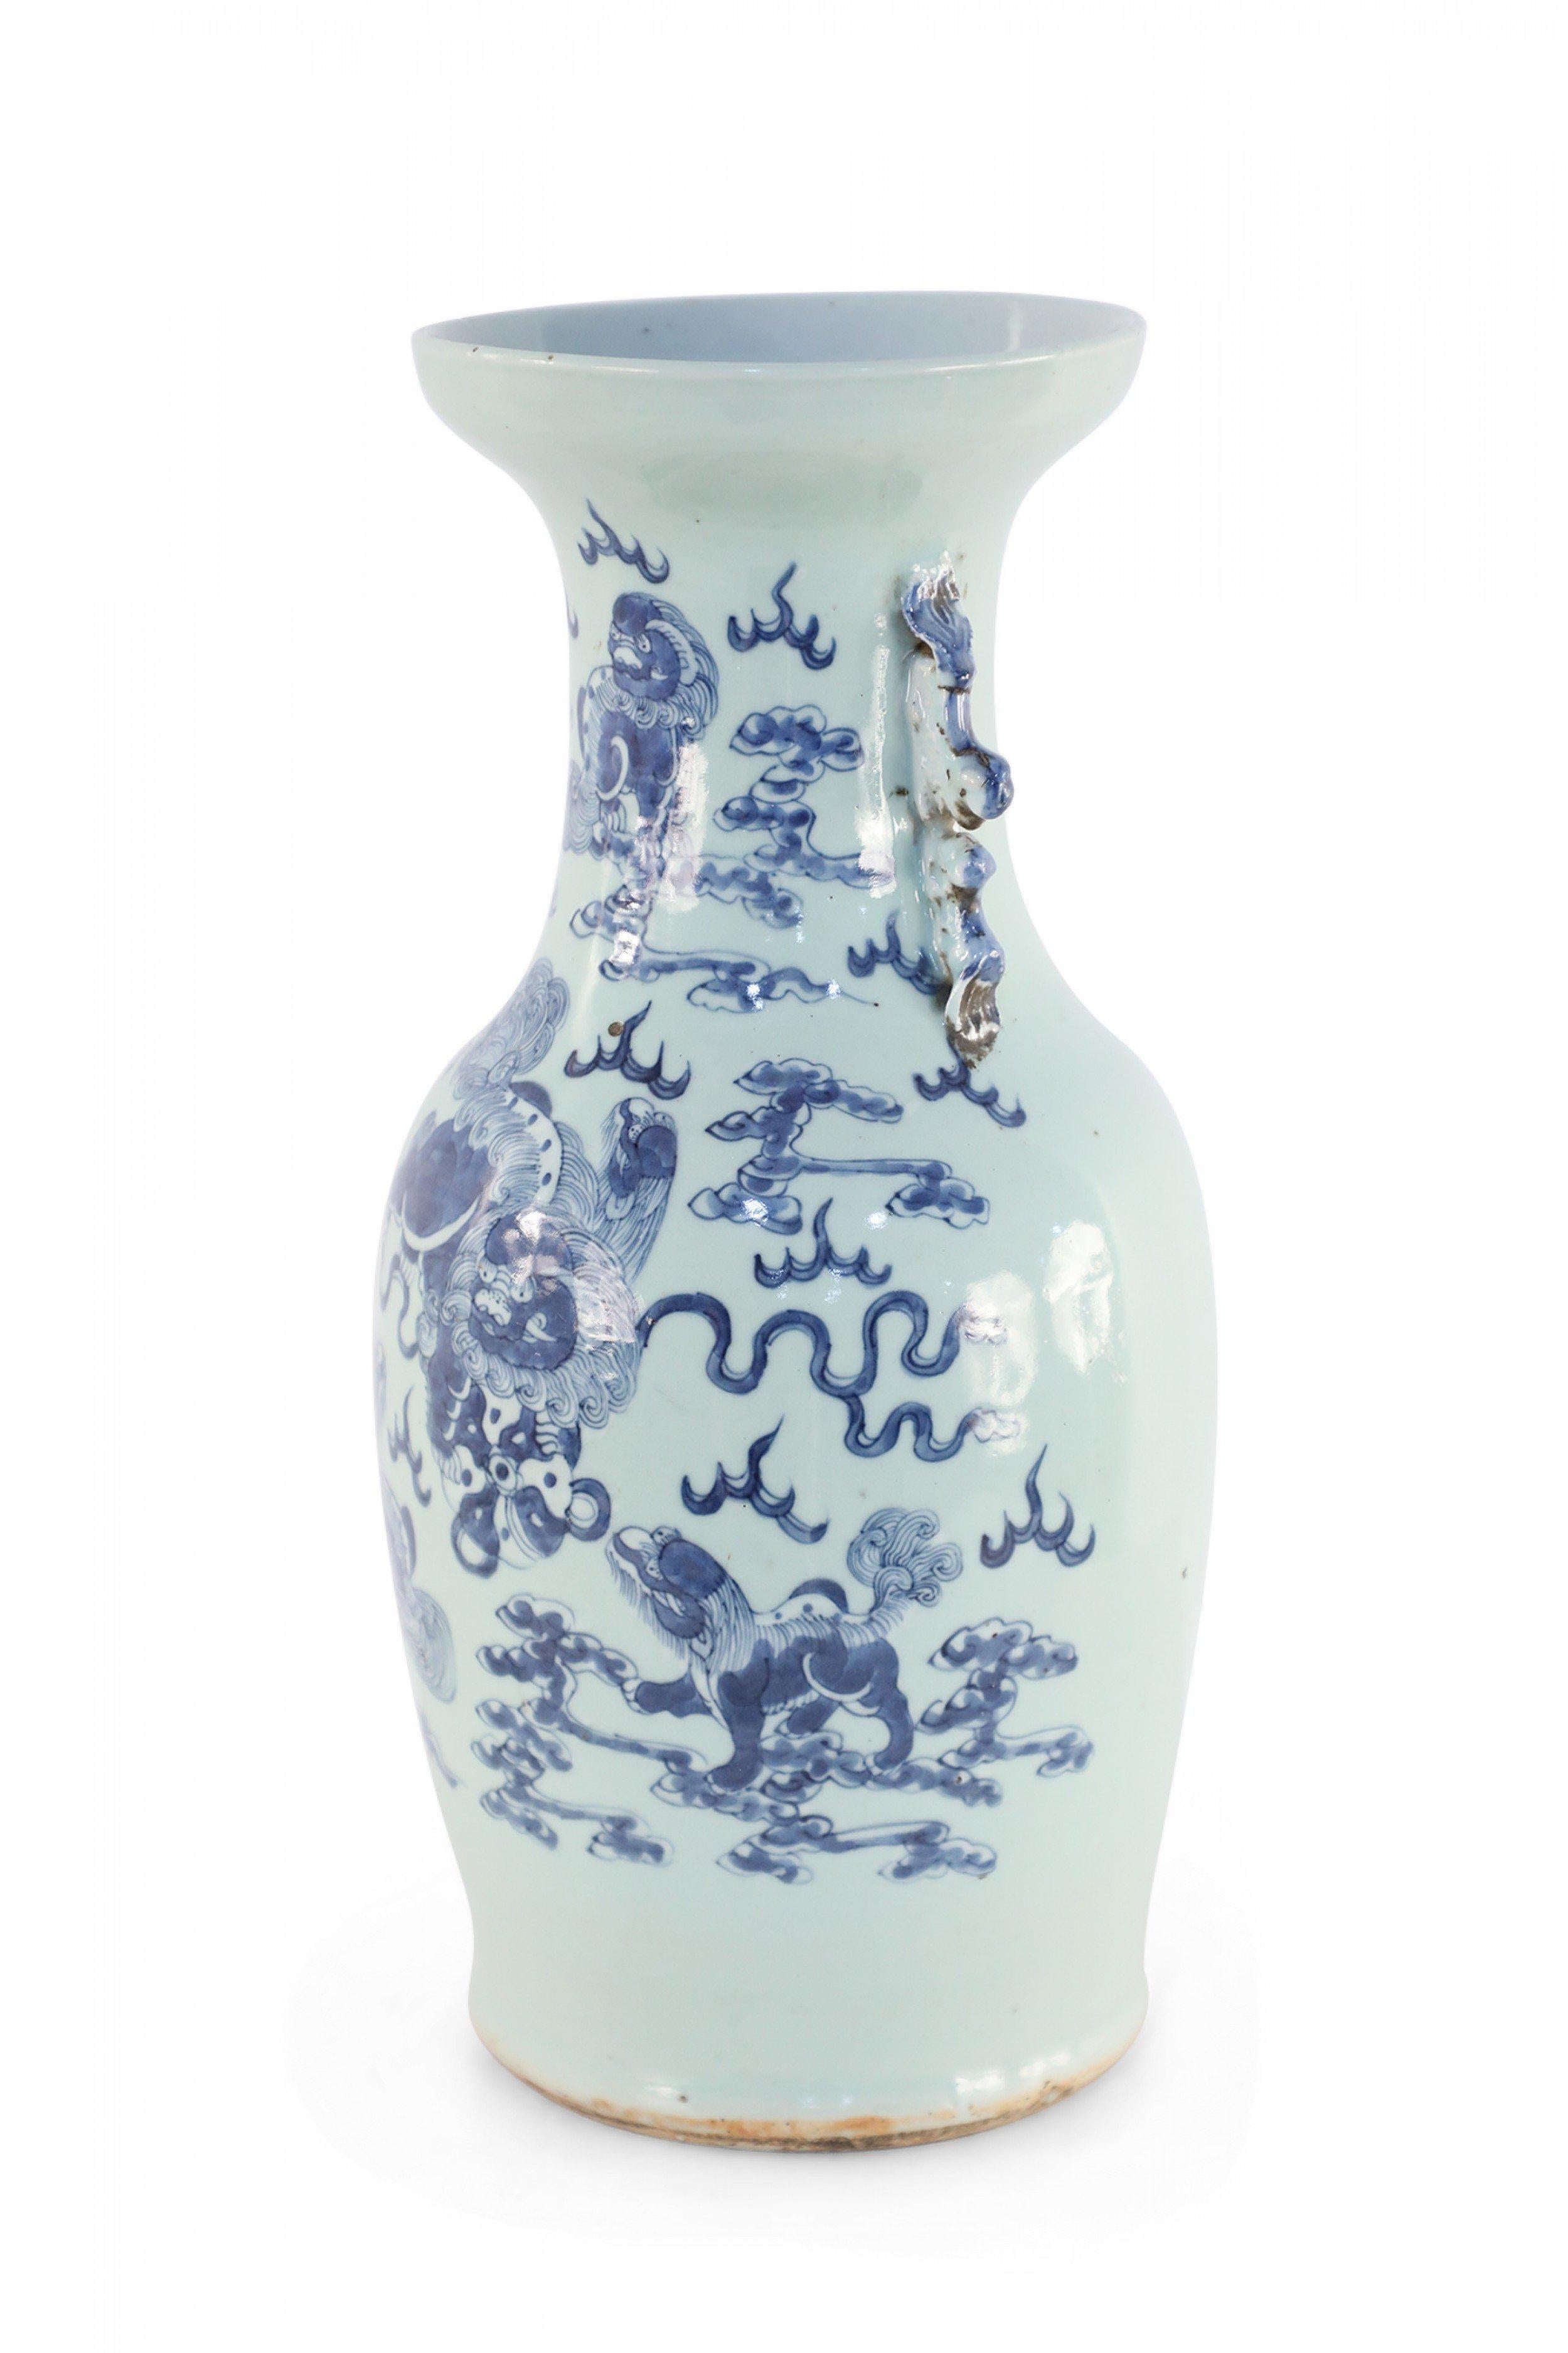 Antique Chinese (Late 19th Century) off-white porcelain urn decorated with blue foo dogs playing amid the clouds and accented in two pale blue scrolled handles along the neck.
  